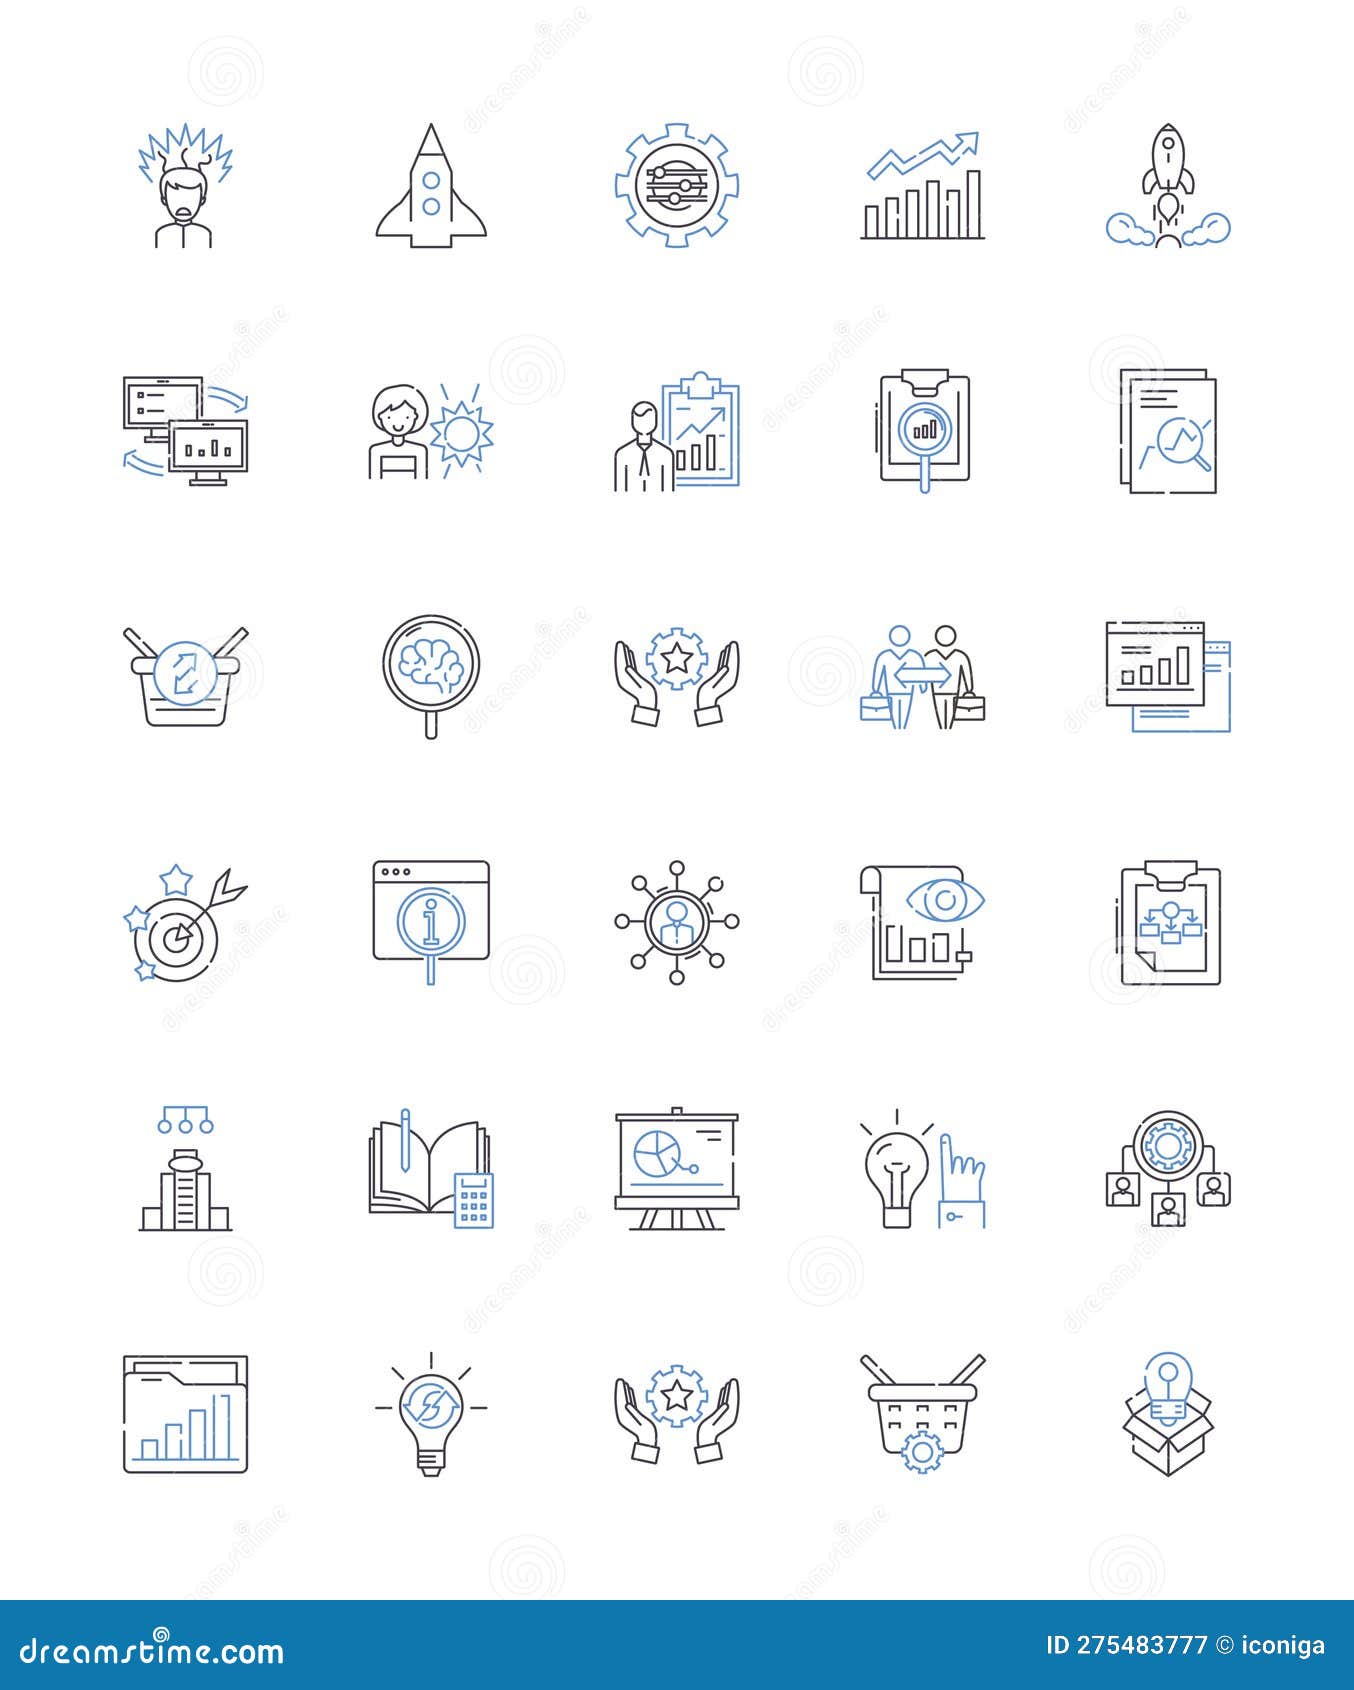 direction and instruction line icons collection. navigate, guide, command, direct, mentor, instruct, advise  and